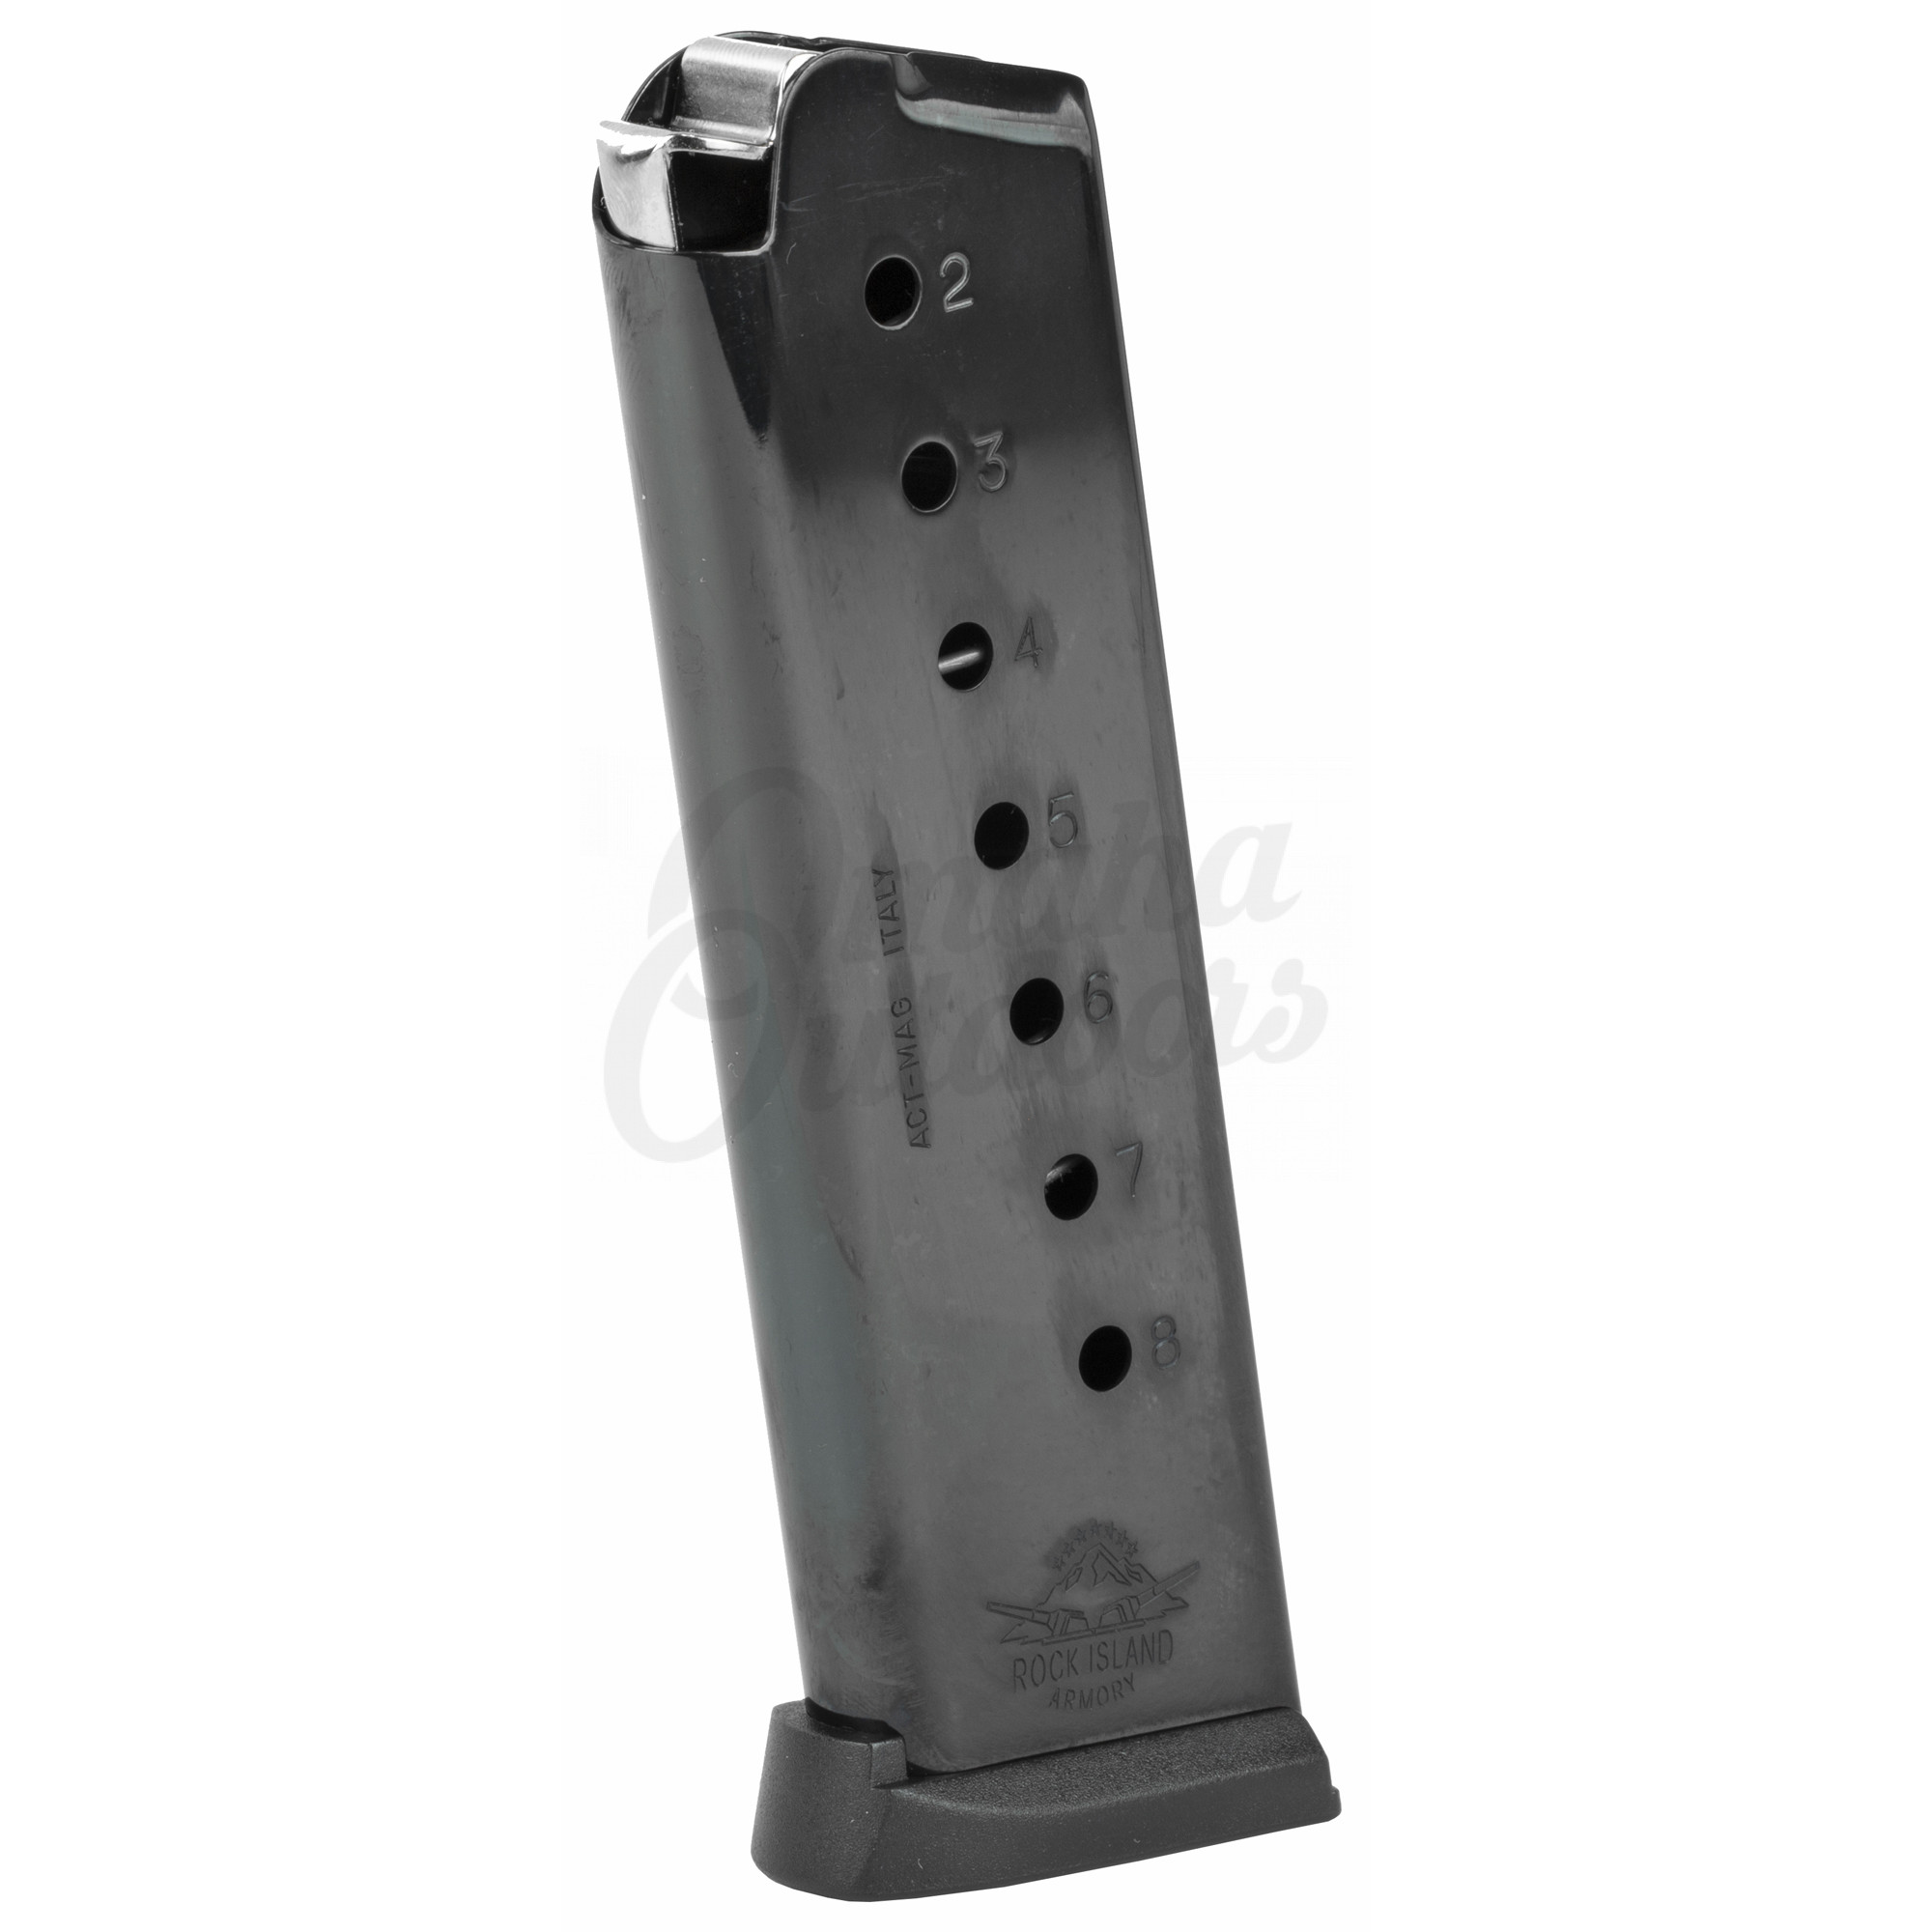 Rock Island Armory 1911 Magazine 45 Acp 8 Rounds Steel Blued In Stock 0417